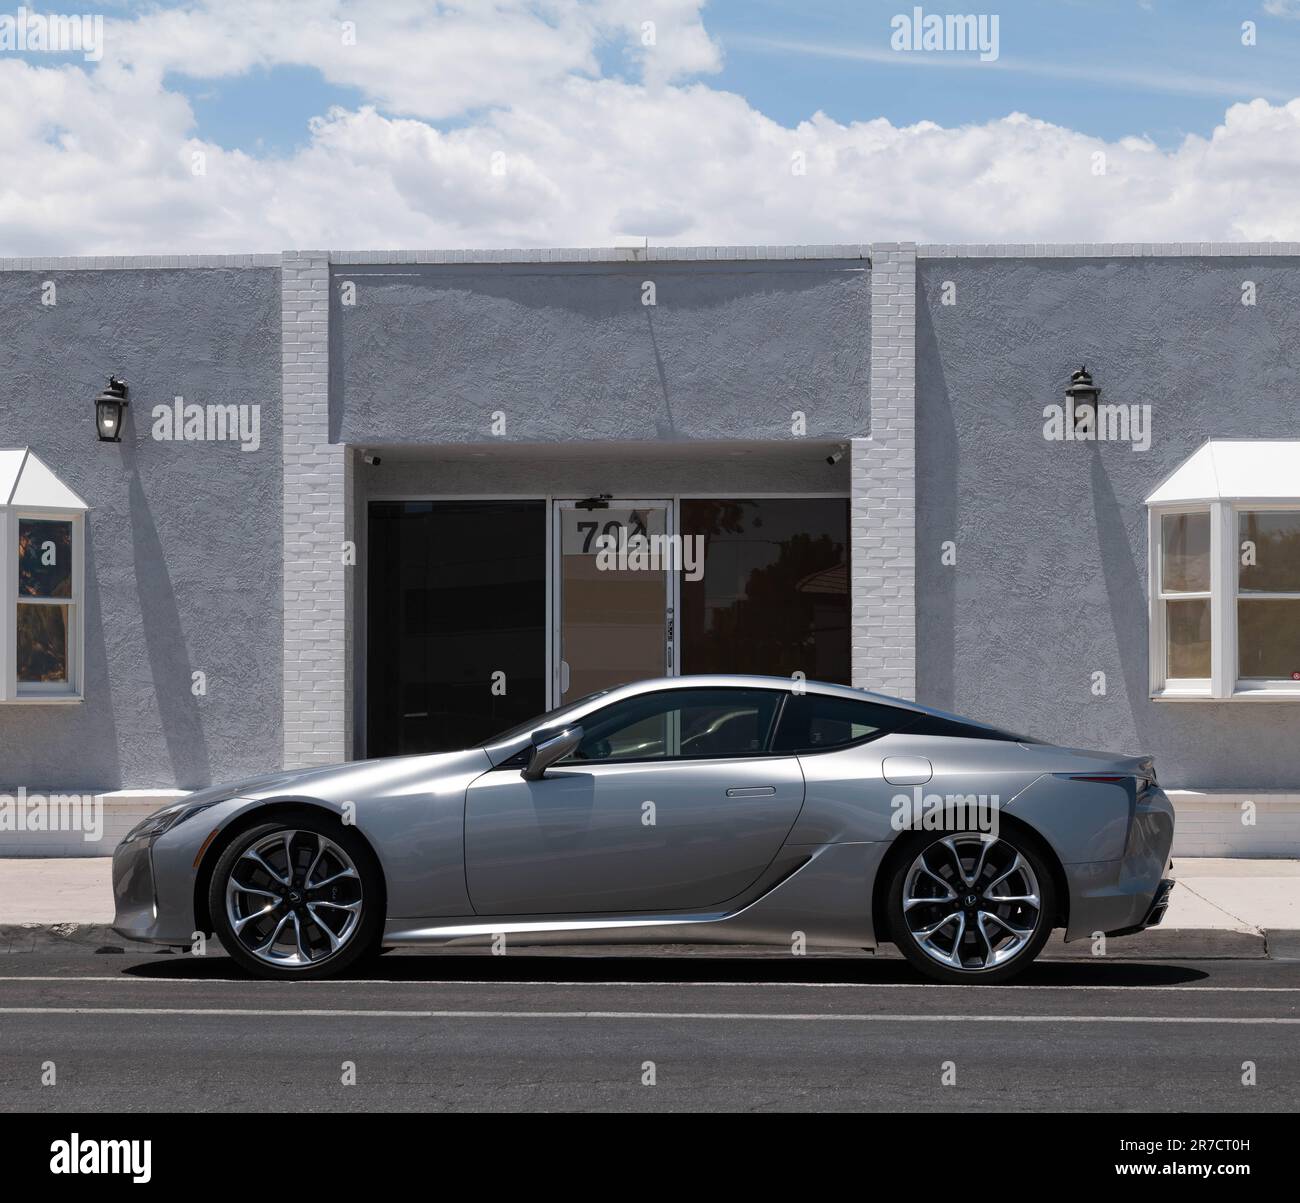 Lexus LC 500 silver coupe parked in the Art District, Las Vegas, Nevada. Stock Photo